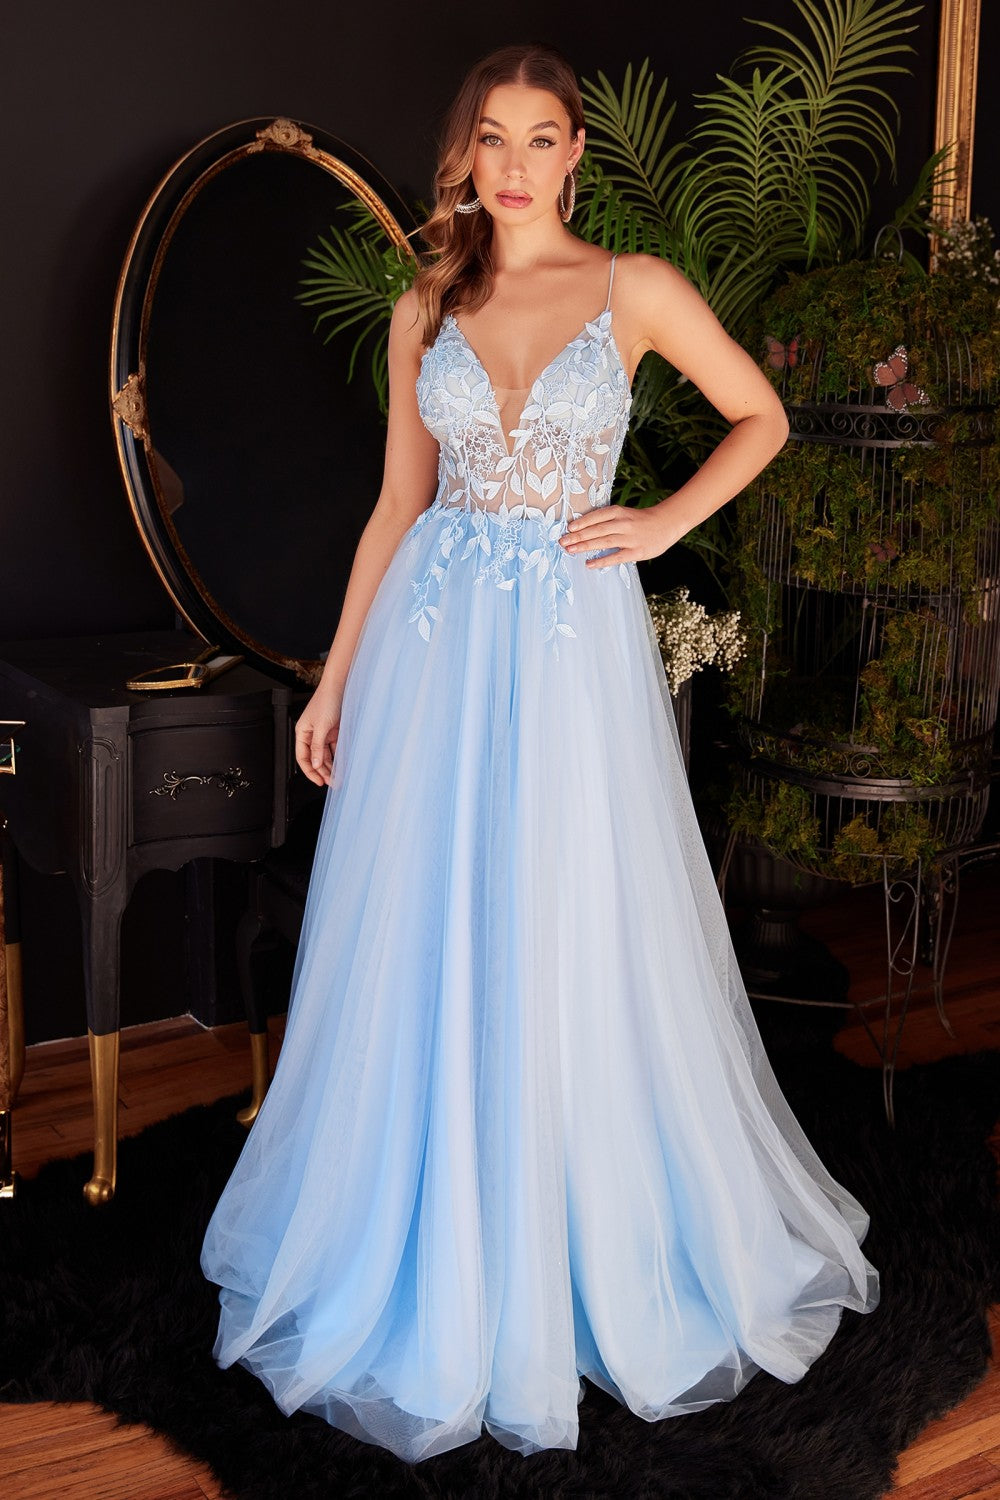 Layered Tulle A-Line Floral Vintage Princess Gown Sheer V-neck Spaghetti Strap Bodice Delicate Cute Pretty Evening Ball Dress CDCD2214 Elsy Style Prom Dress